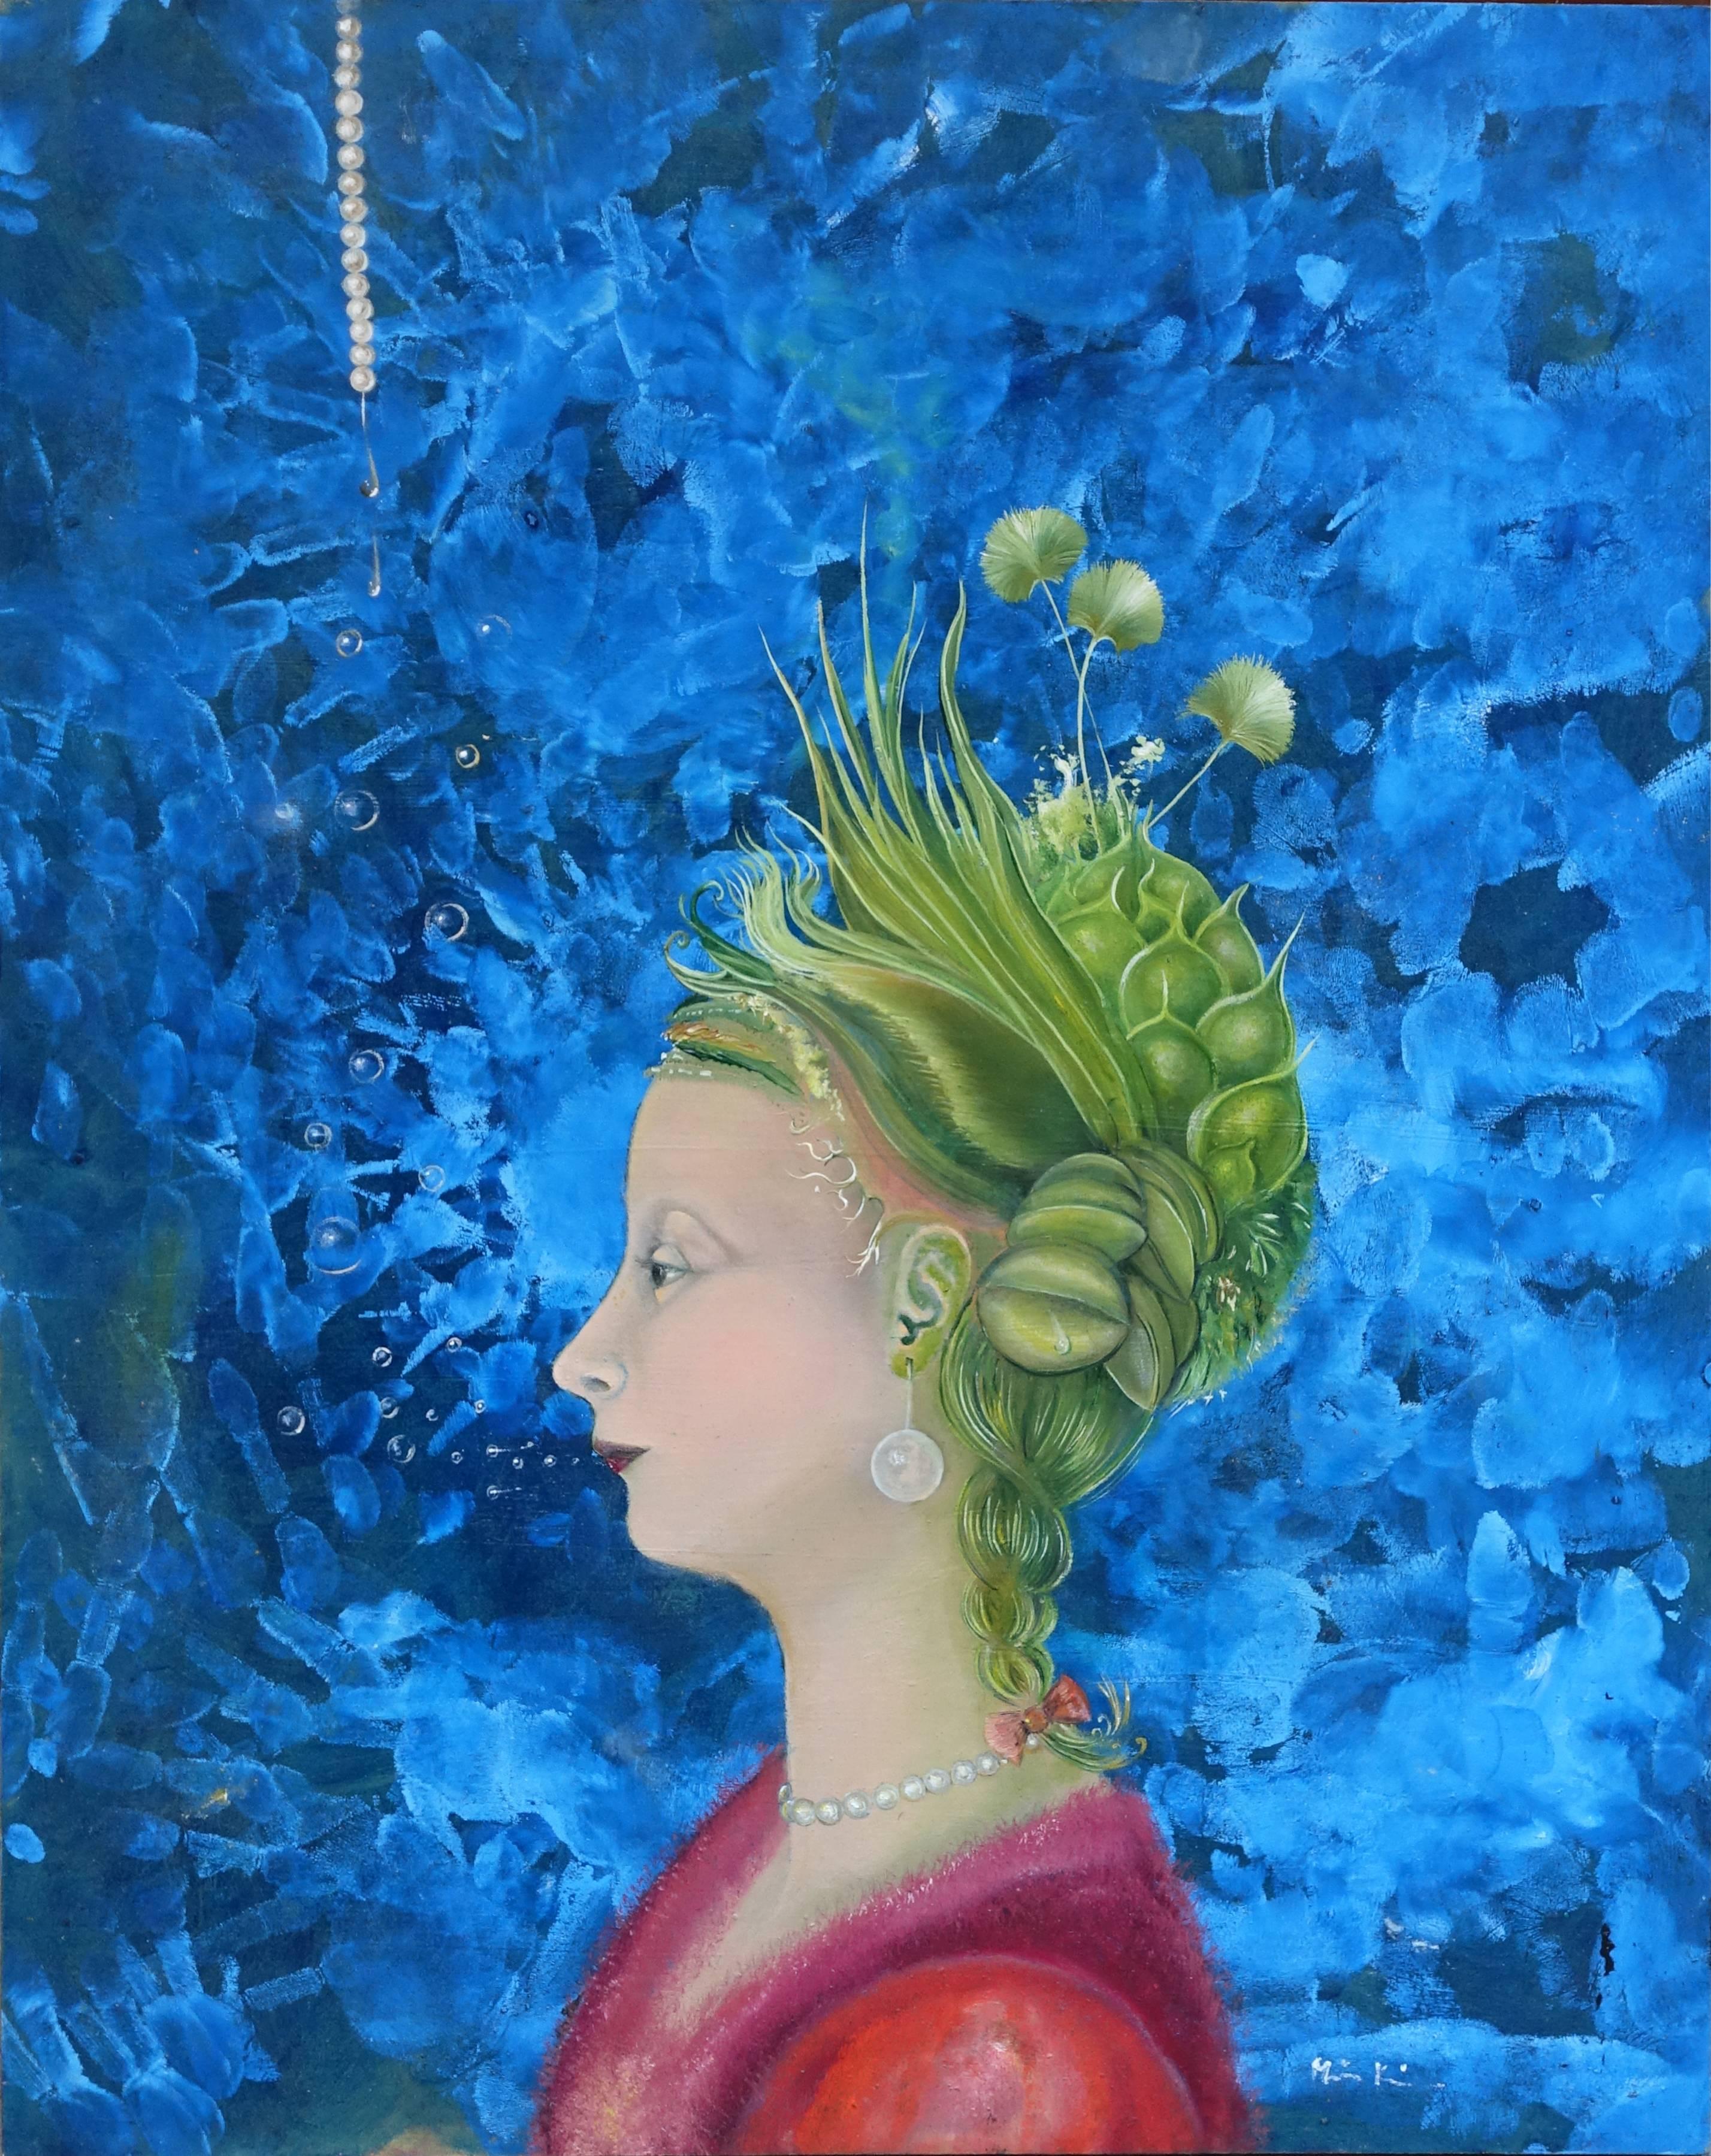 Maike Kreichgauer Figurative Painting - Woman with Plants on her Mind